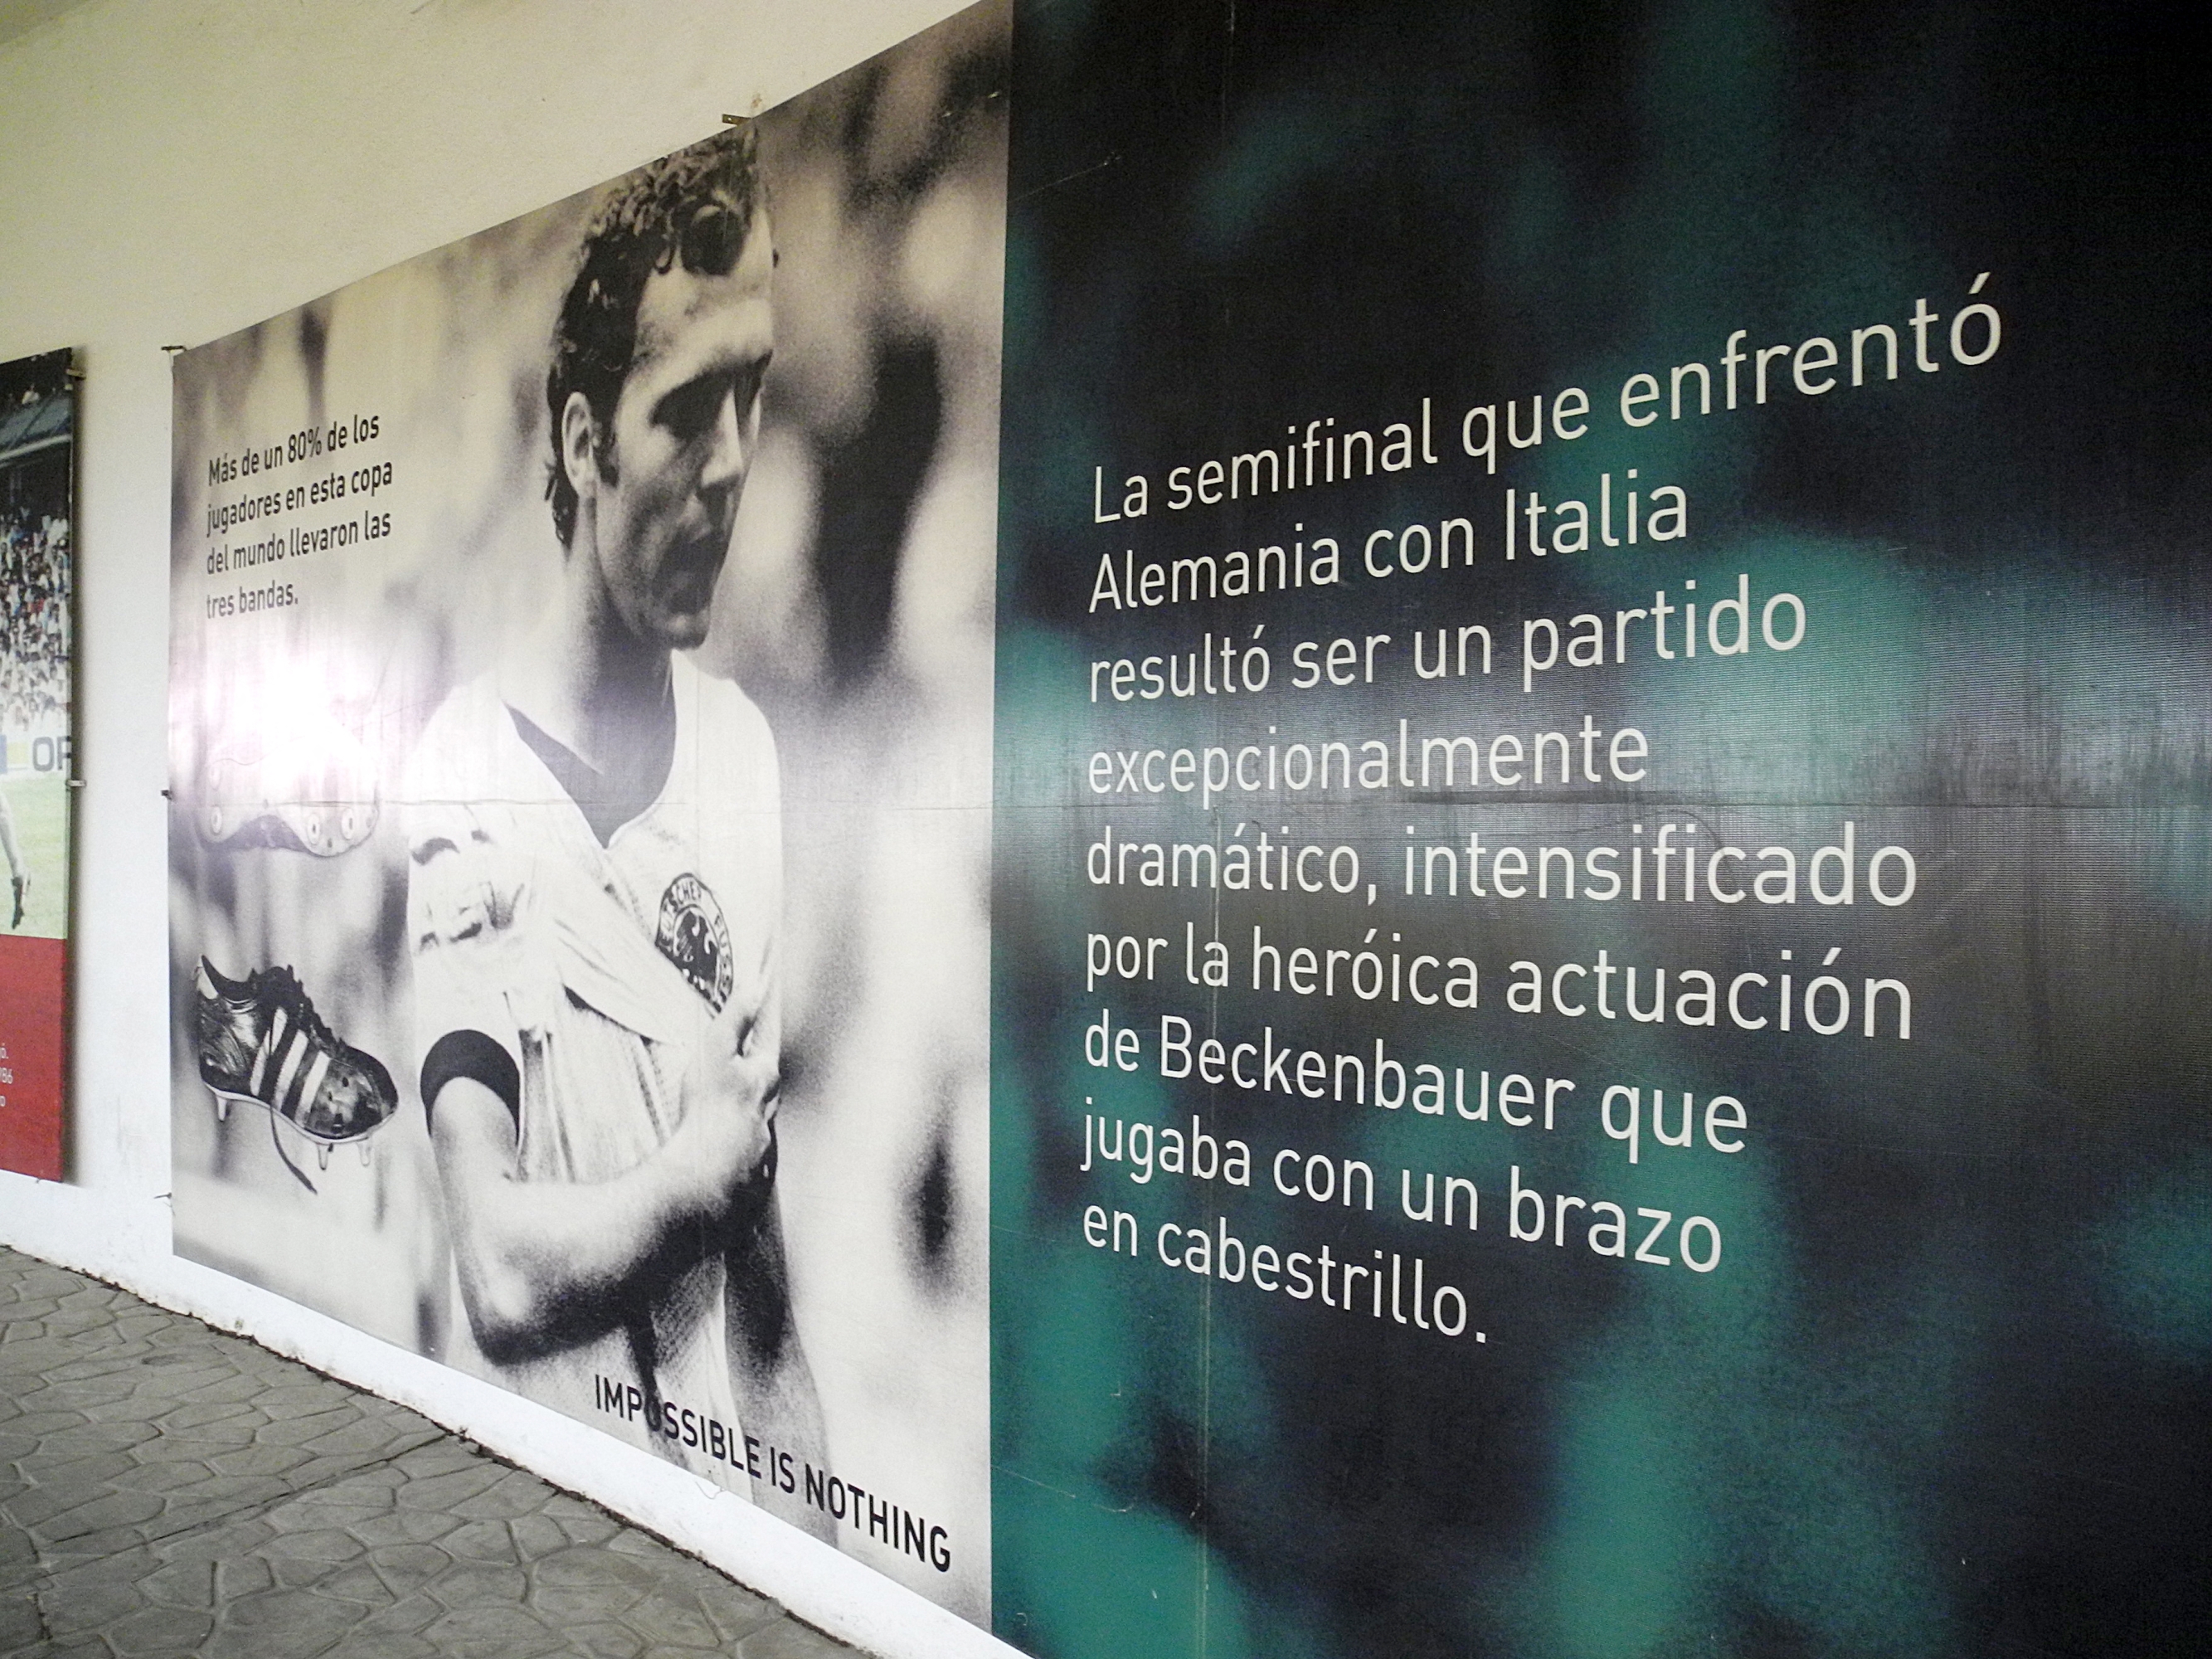 A photo in the catacombs of the Estadio Azteca commemorates Franz Beckenbauer, who played for West Germany in the 'Game of the Century' against Italy during the 1970 FIFA World Cup with a bandaged arm, in Mexico City, Mexico, 4 May 2016. The Estadio Azteca opened in 1966. Photo: Denis Duettmann/dpa (Photo by Denis Düttmann / DPA / dpa Picture-Alliance via AFP)